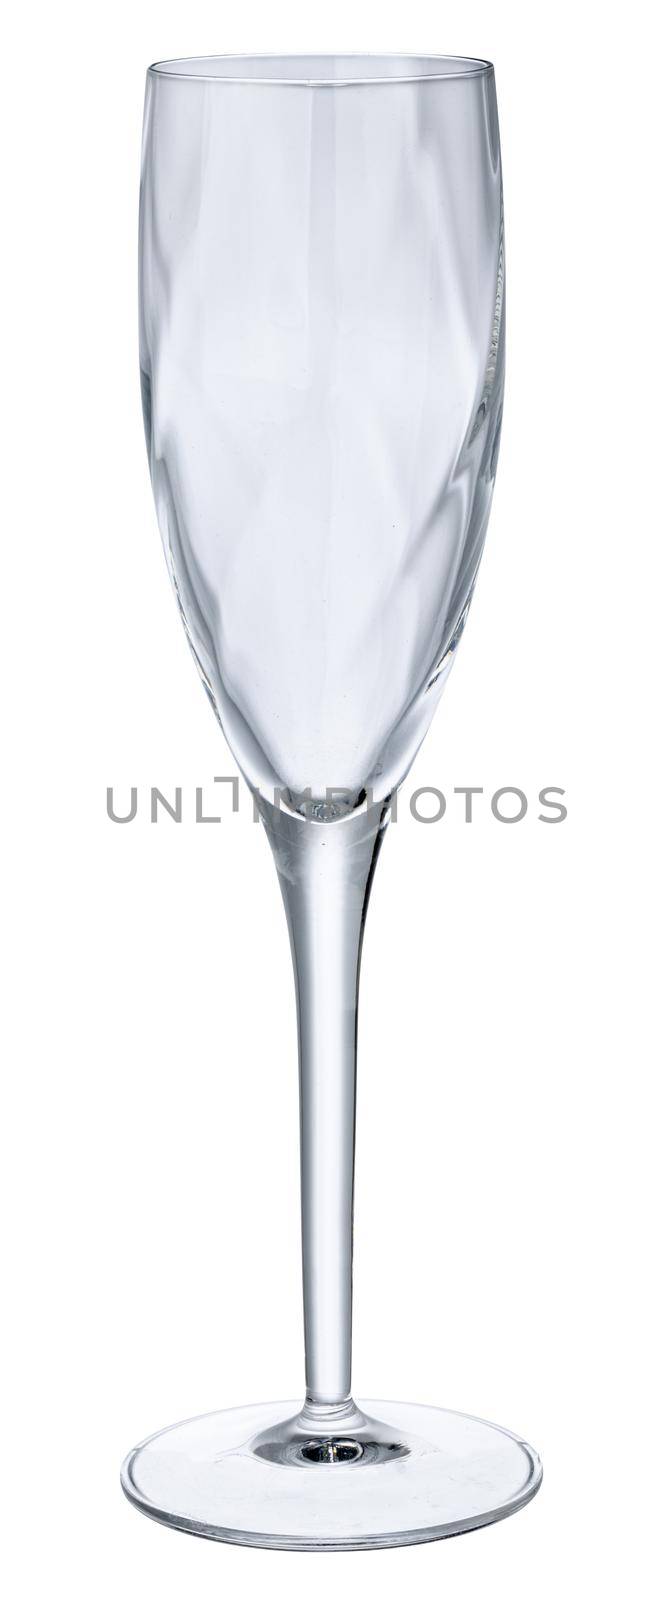 Empty champagne glass isolated on white background by Fabrikasimf